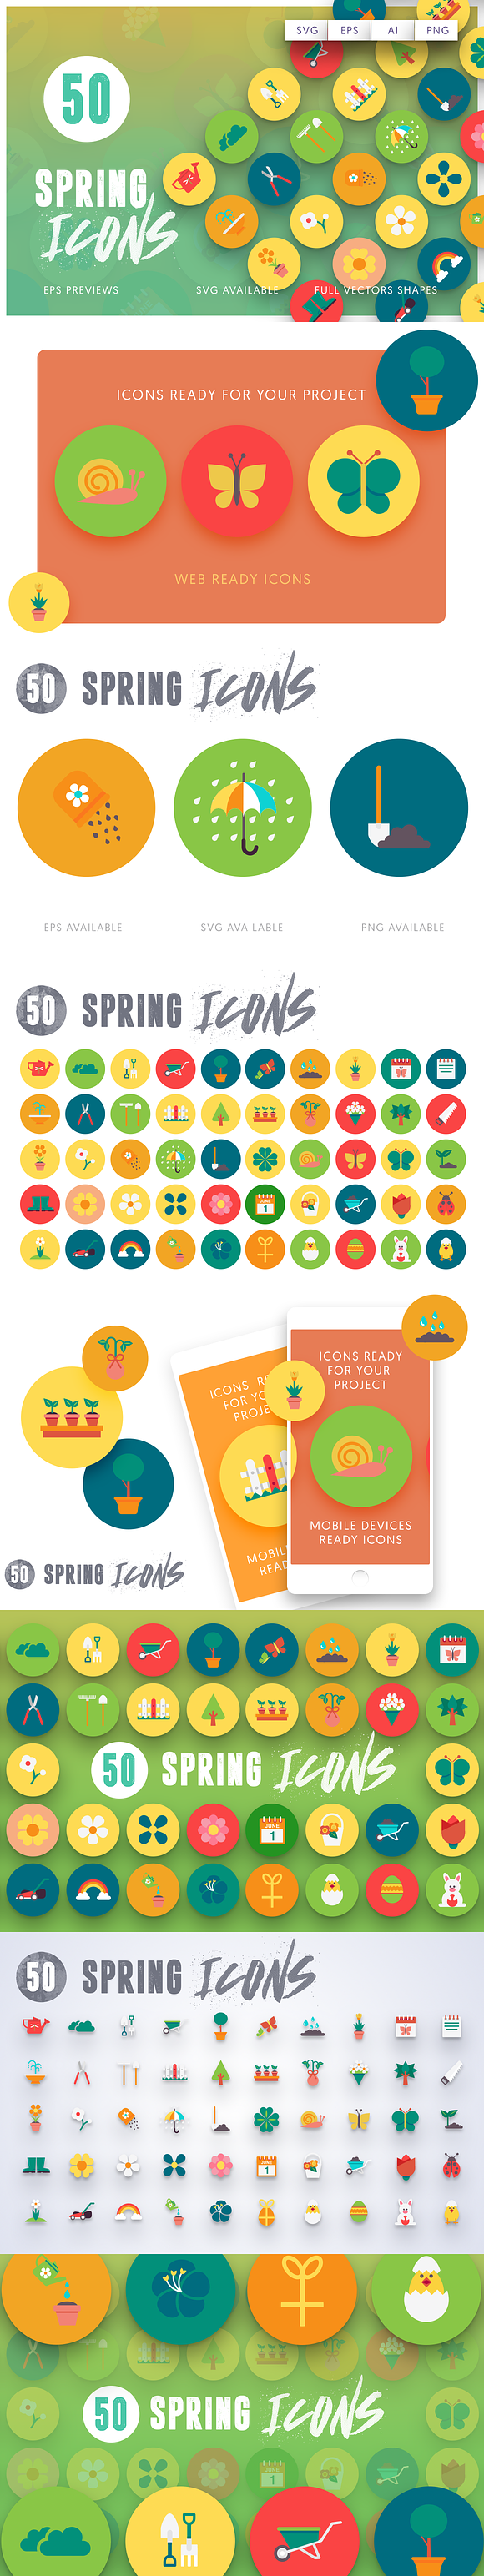 50 Spring Icons Vol.2 in Easter Icons - product preview 7